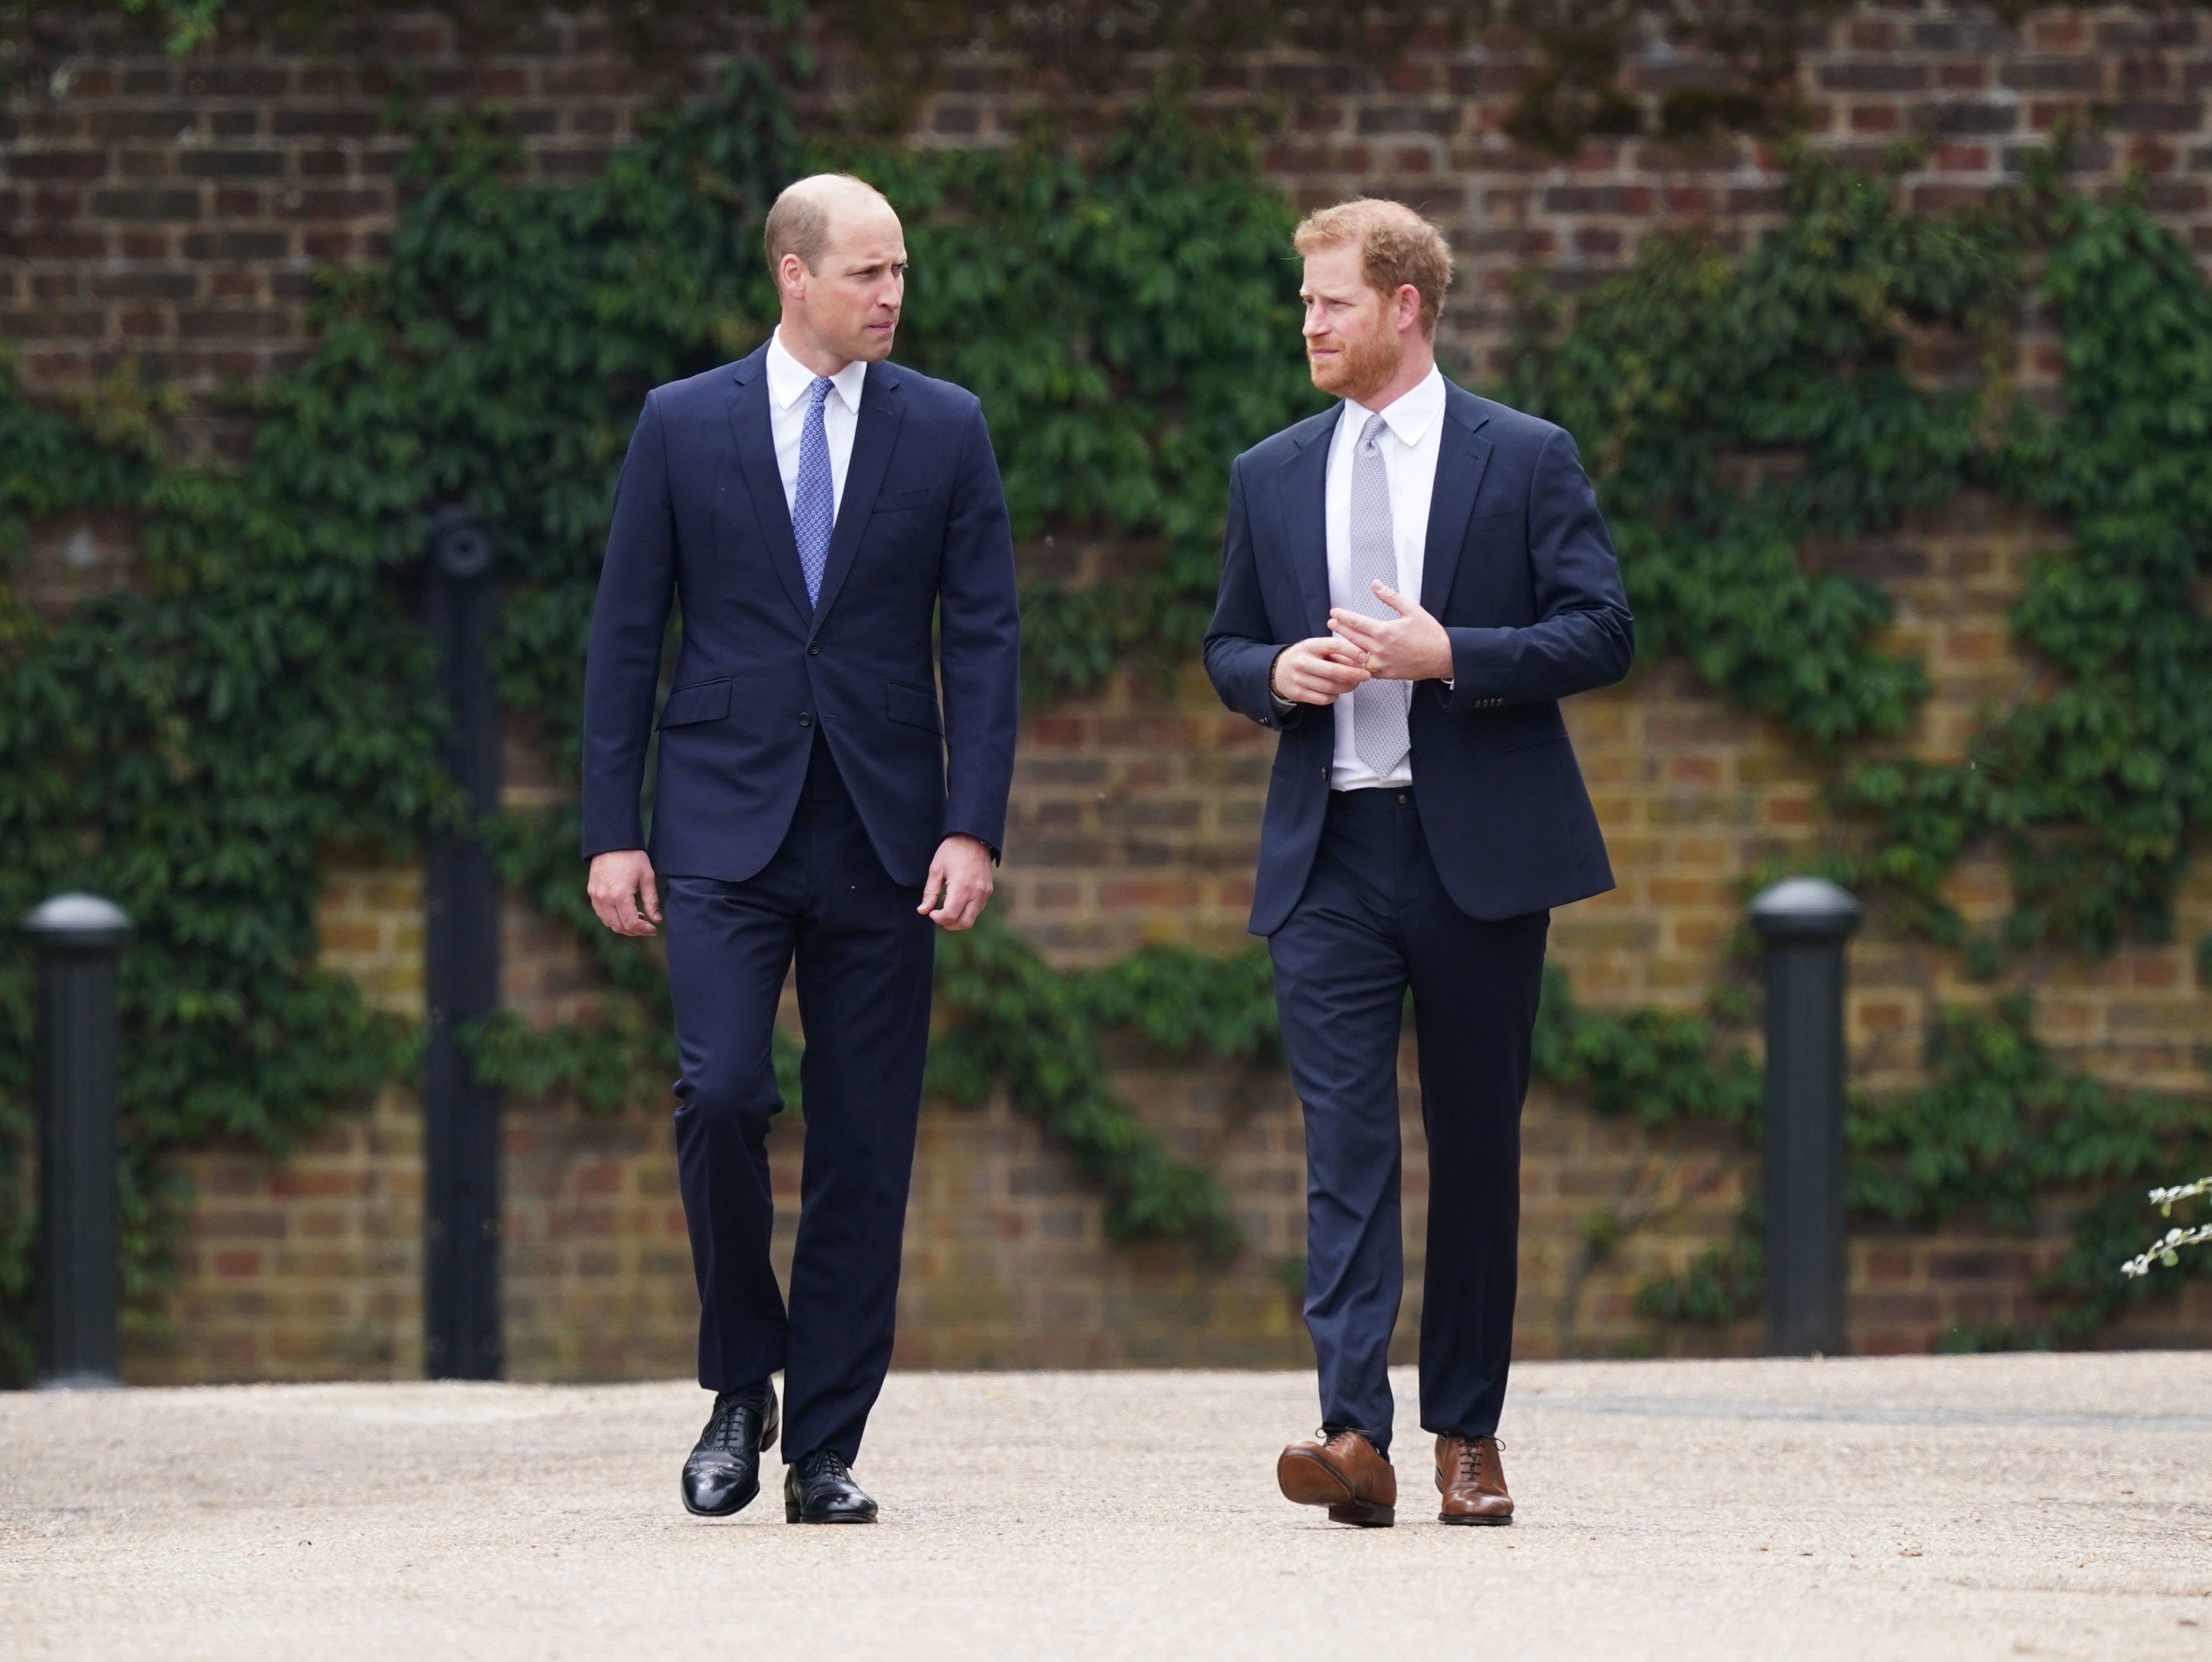 Prince William and Prince Harry at the unveiling of a statue of their mother Princess Diana at Kensington Palace on July 1, 2021, in London, England. | Source: Getty Images